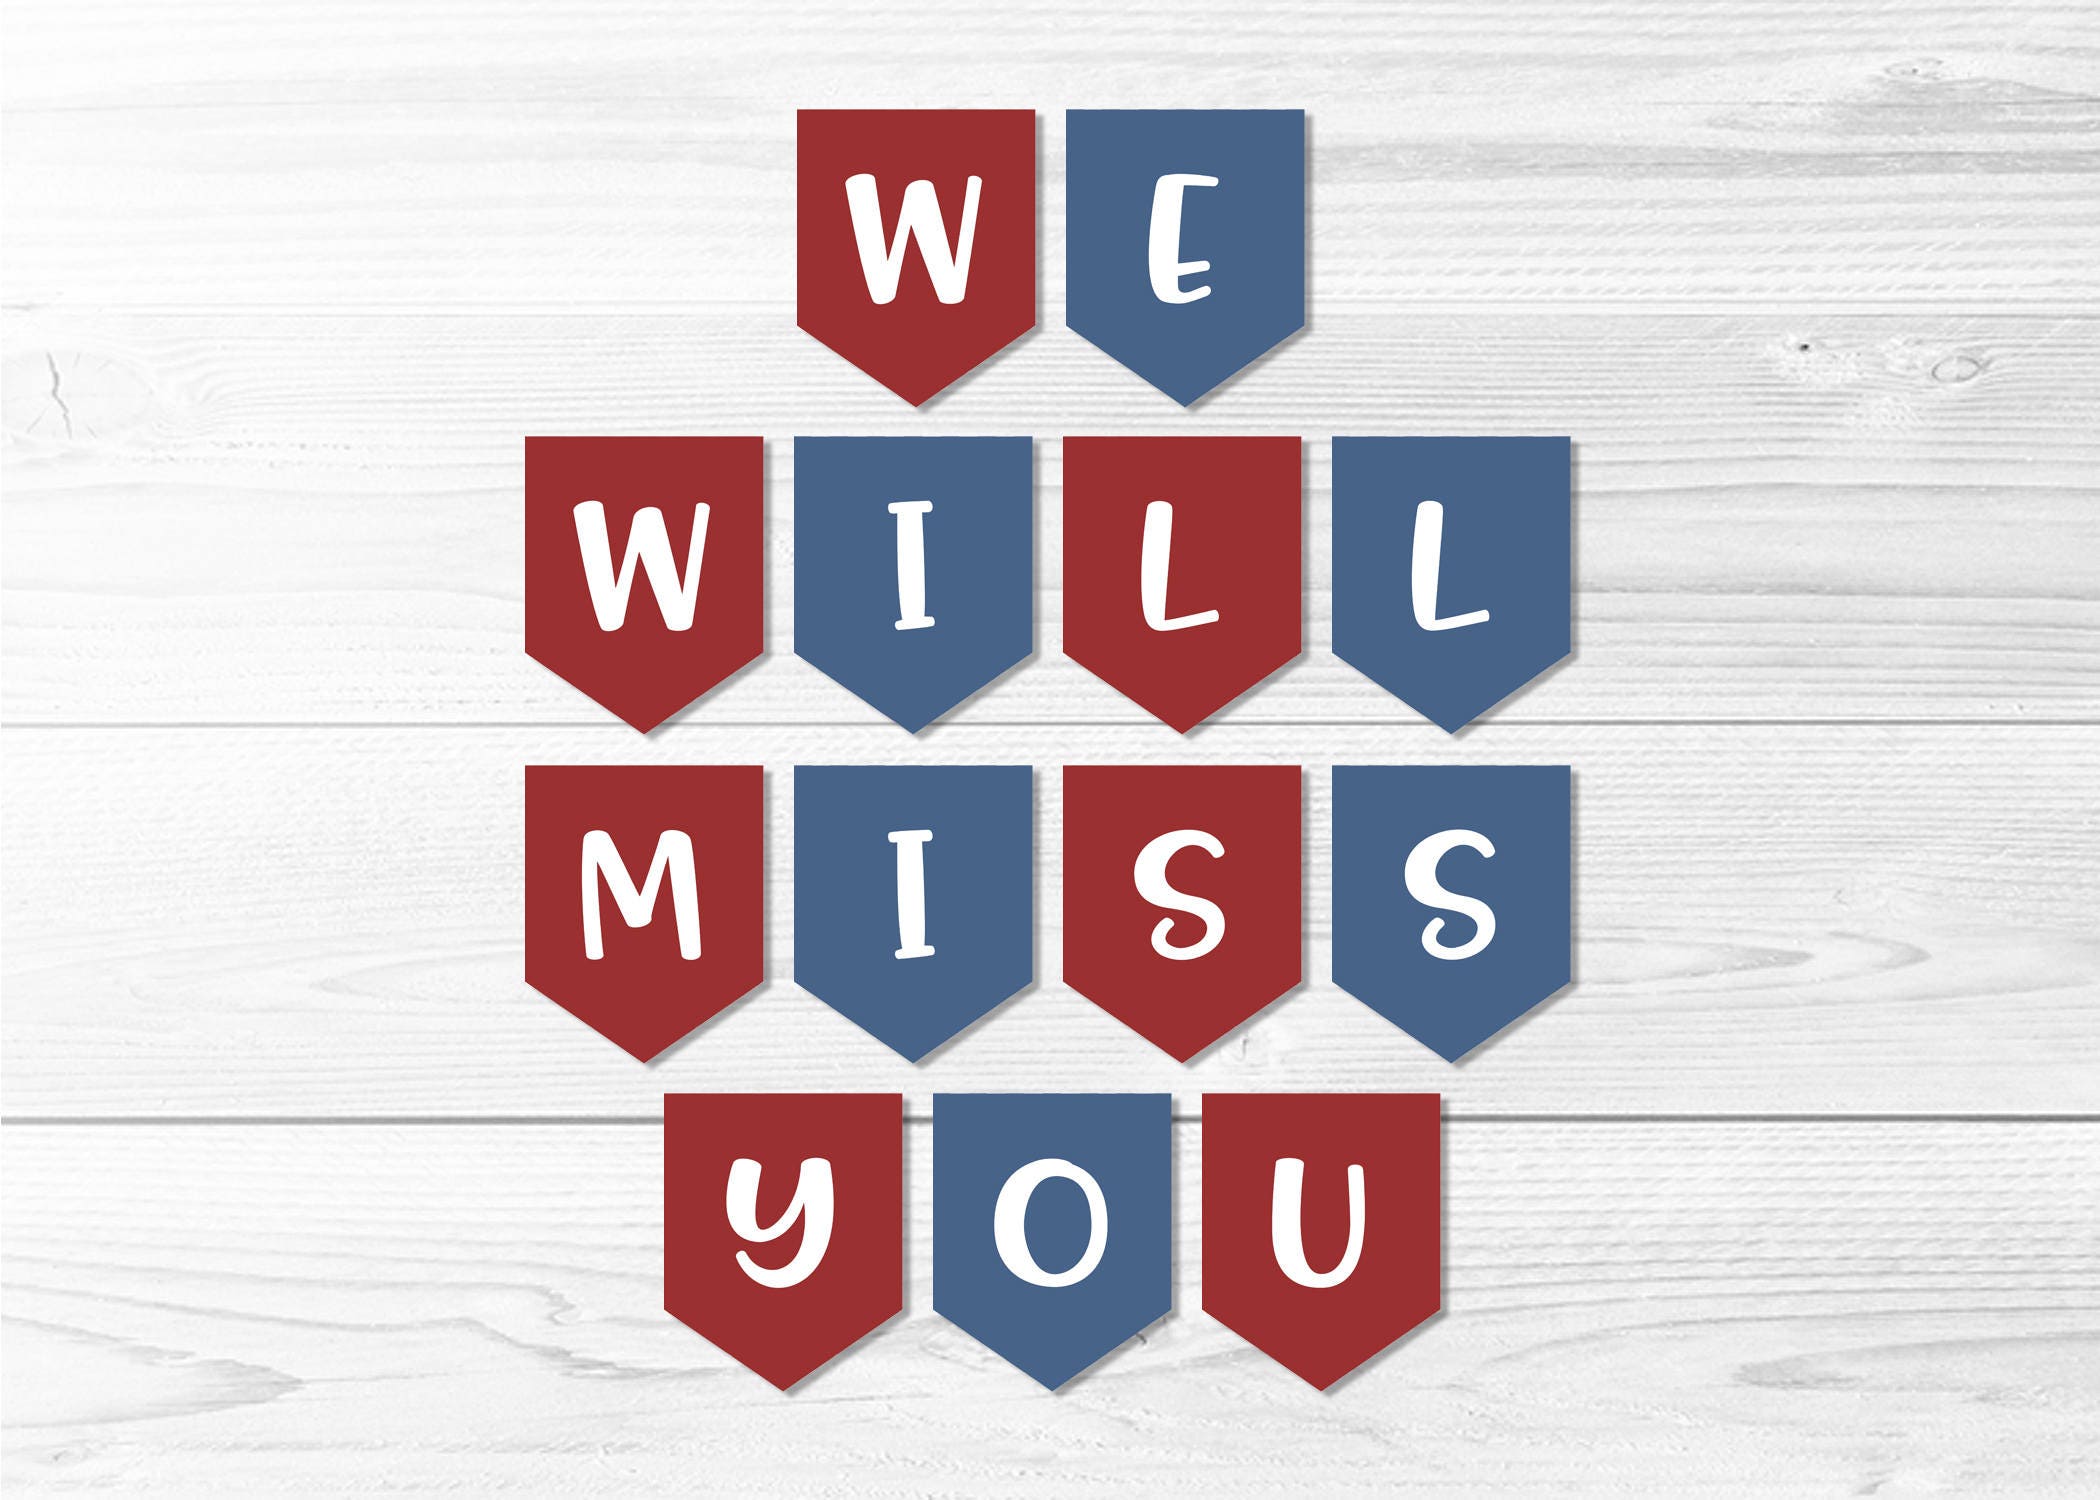 we-will-miss-you-banner-red-white-blue-military-banner-etsy